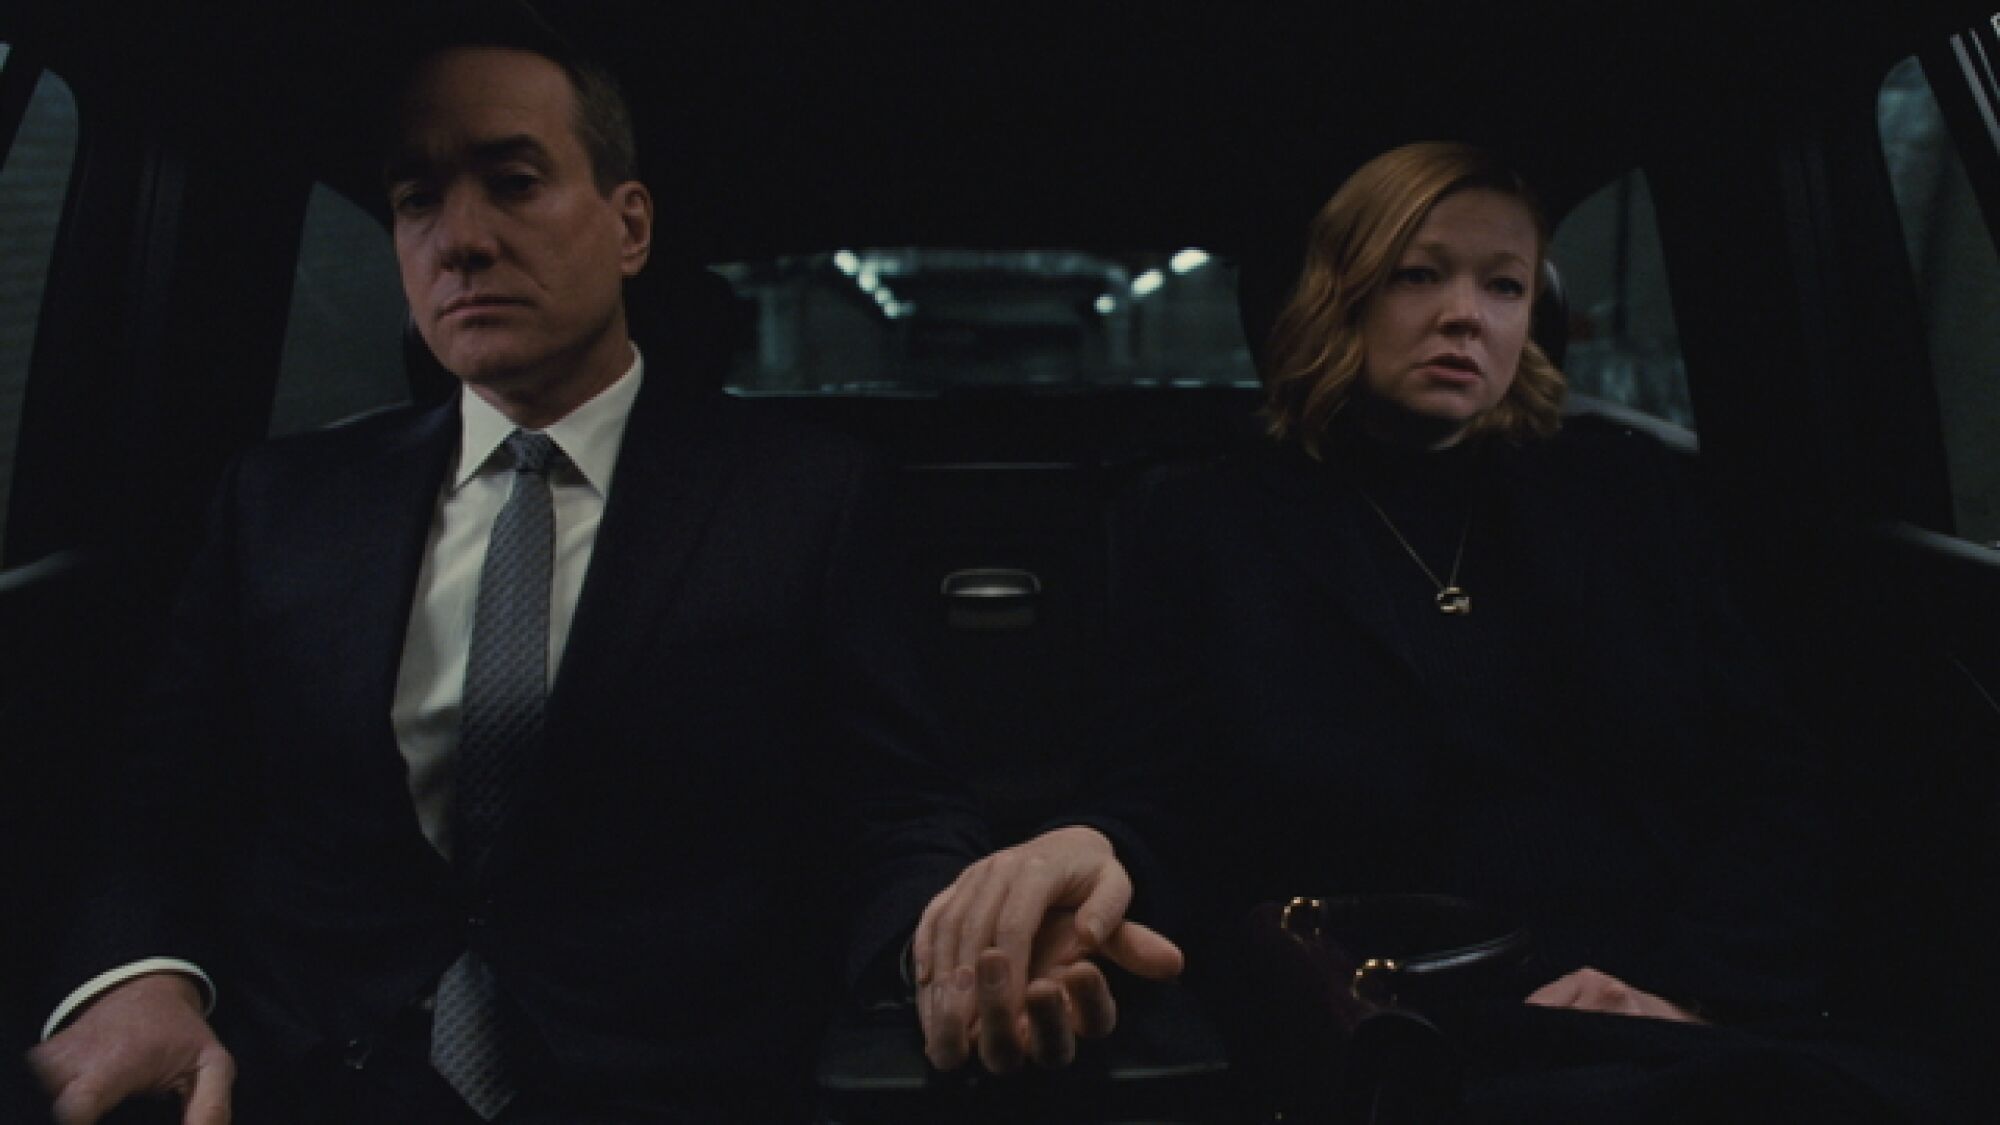 A husband and wife, dressed all in black, hold hands in the back of a car.